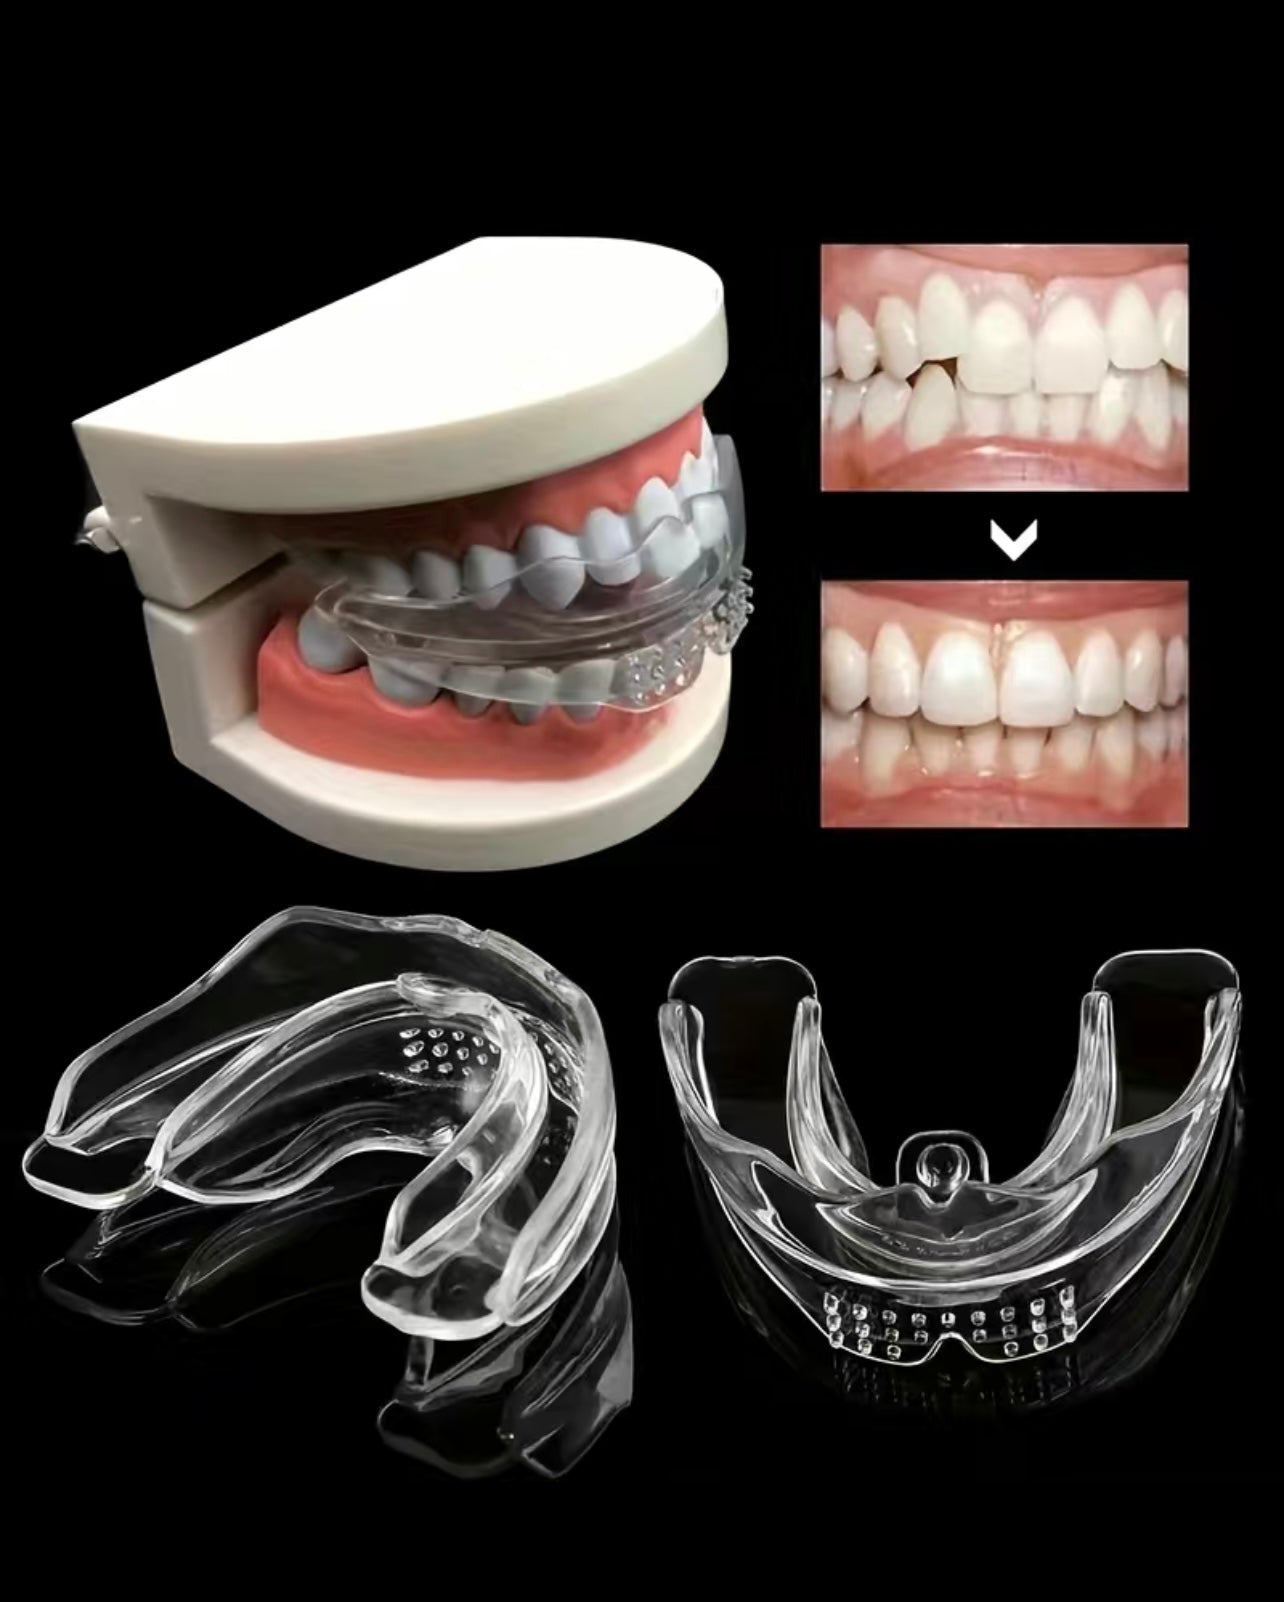 3 Stage Overnight Teeth Aligners - 3 Phase Night Guard Braces